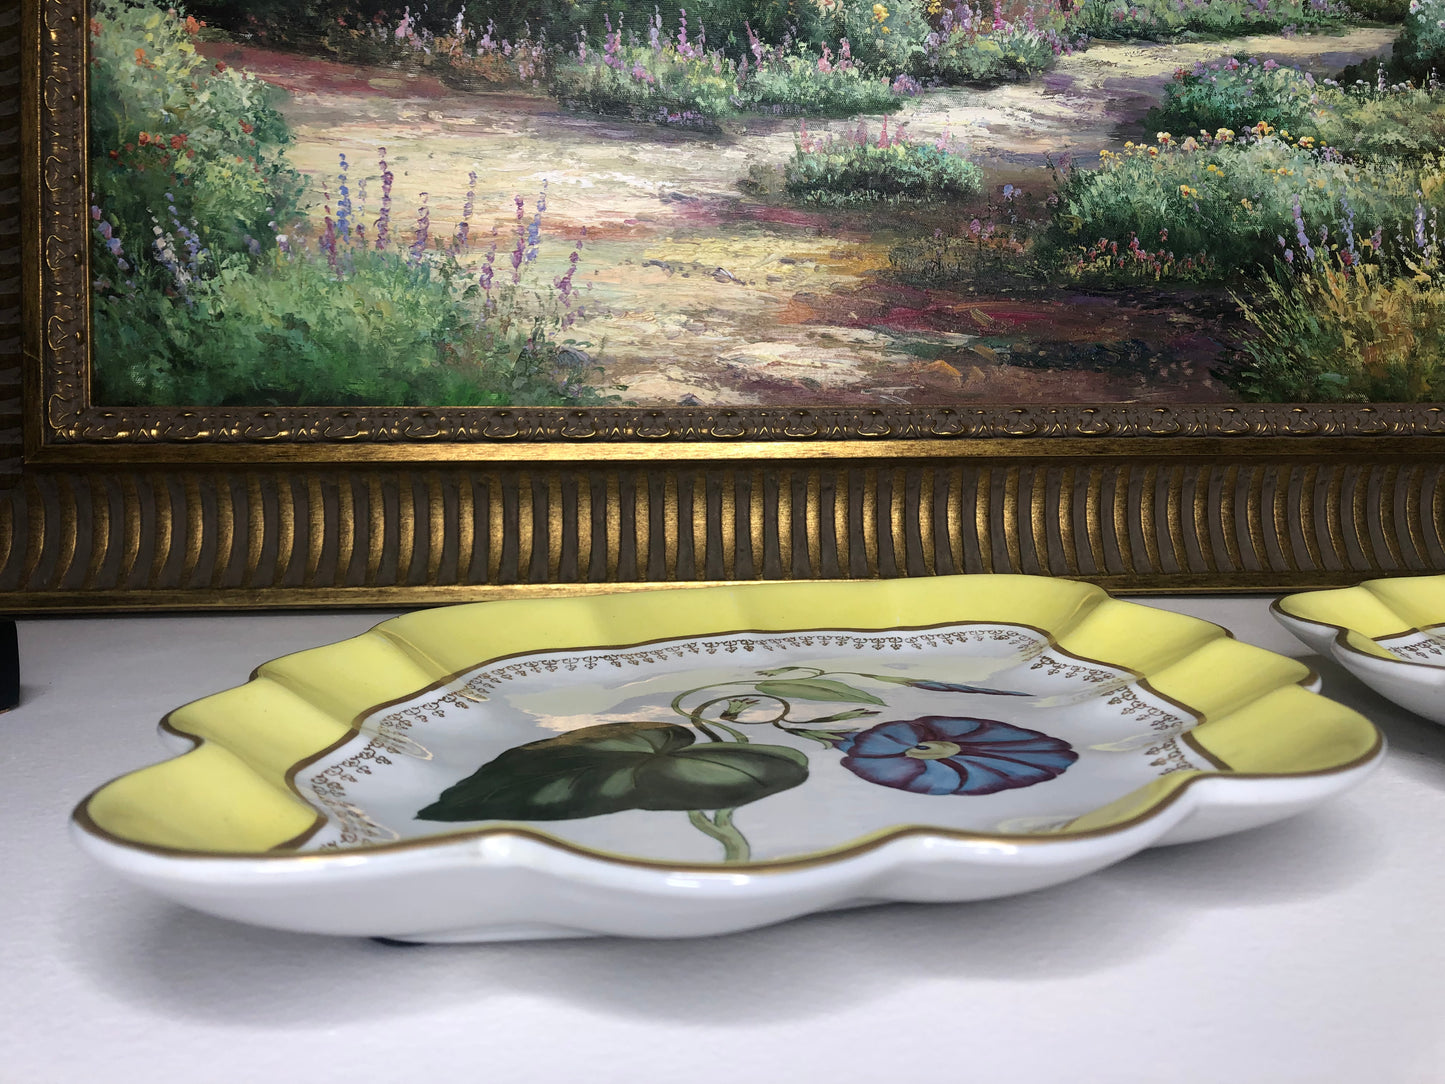 Lovely Chelsea House Morning Glory Floral Tray with scalloped yellow border- Vintage condition!